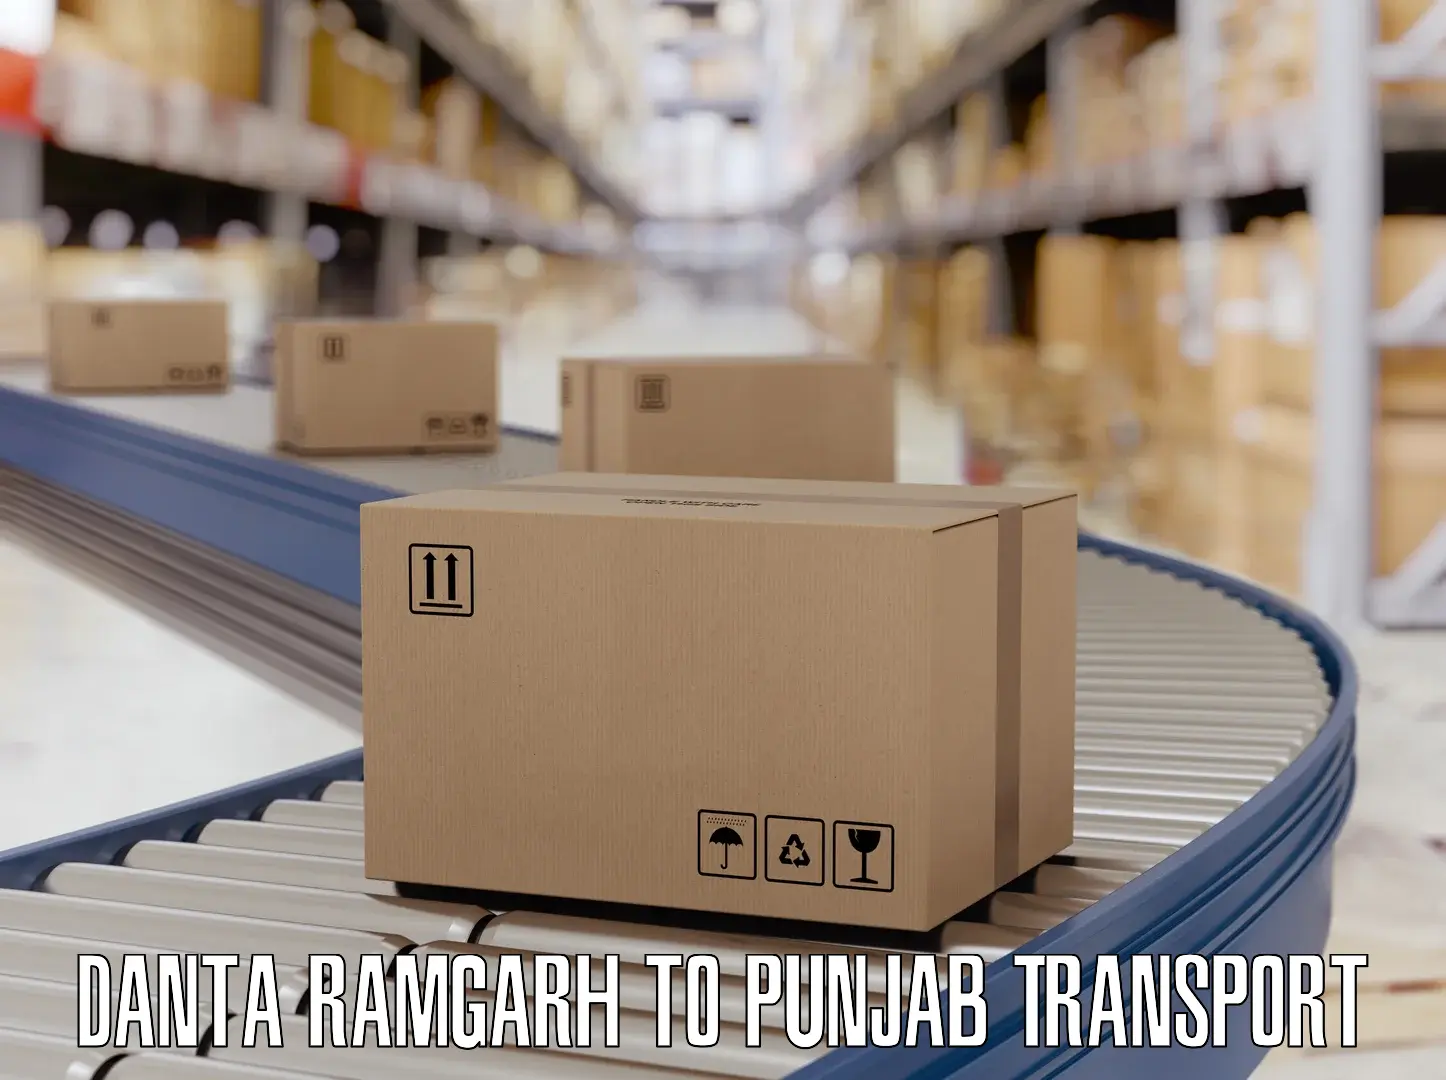 Vehicle transport services Danta Ramgarh to IIT Ropar